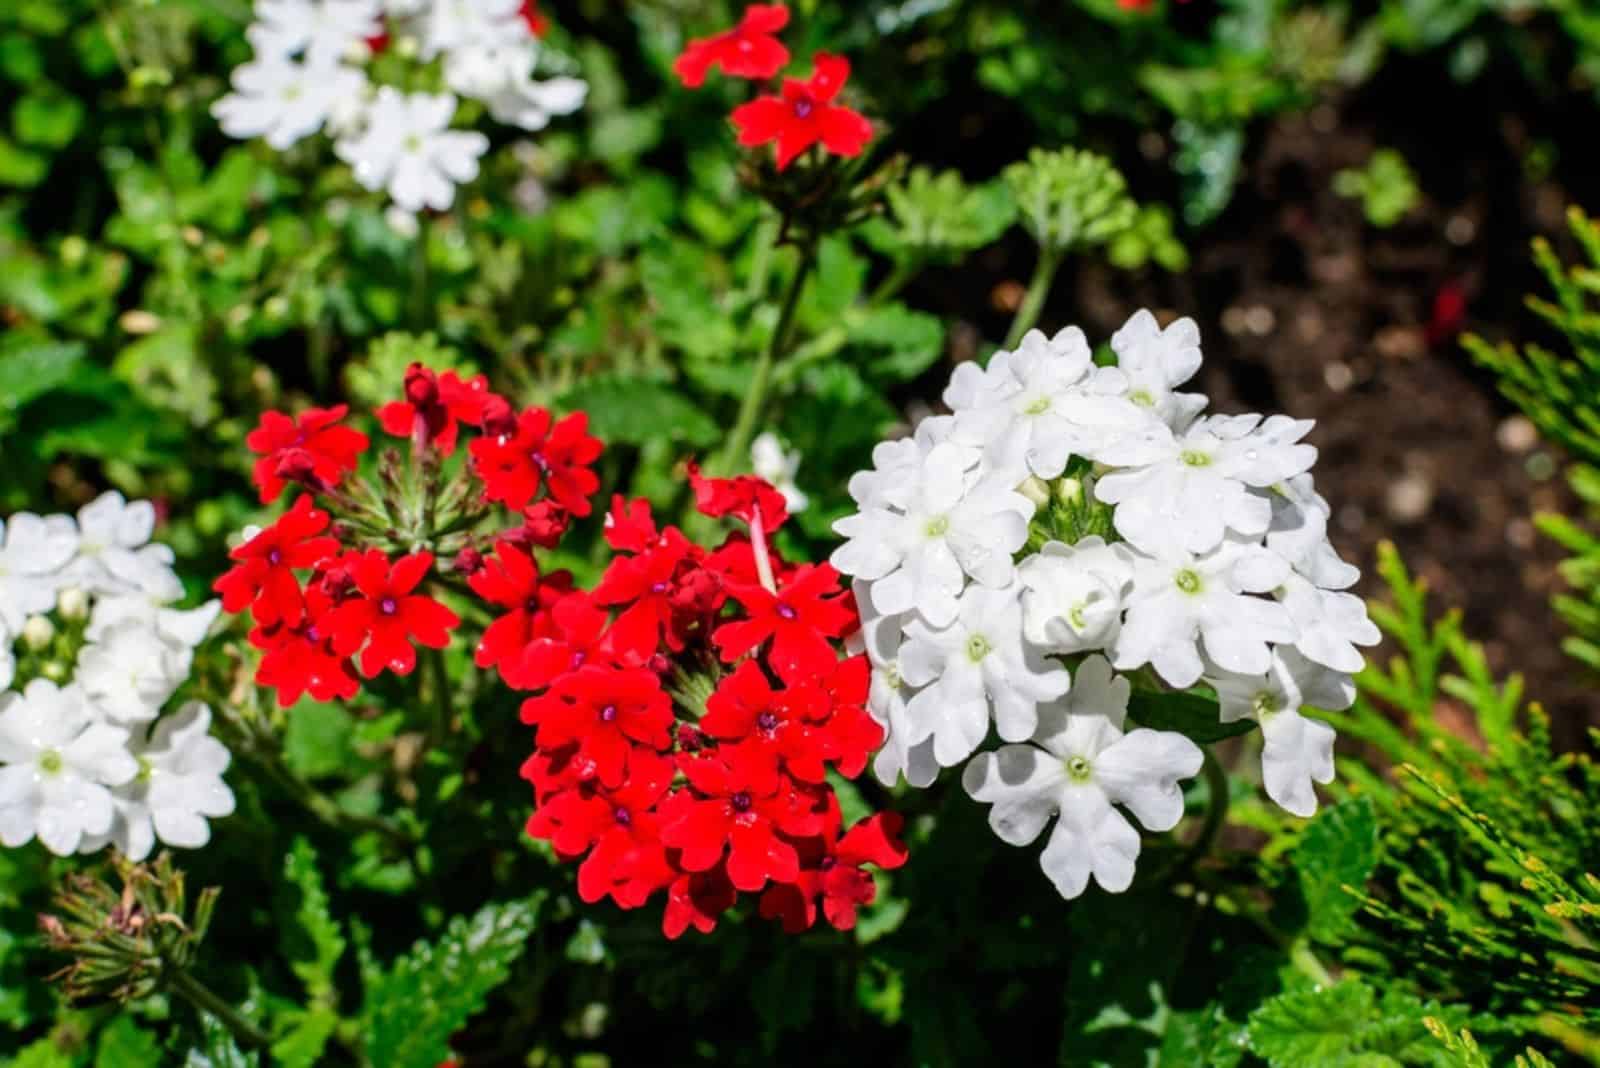 red and white Verbena flowers